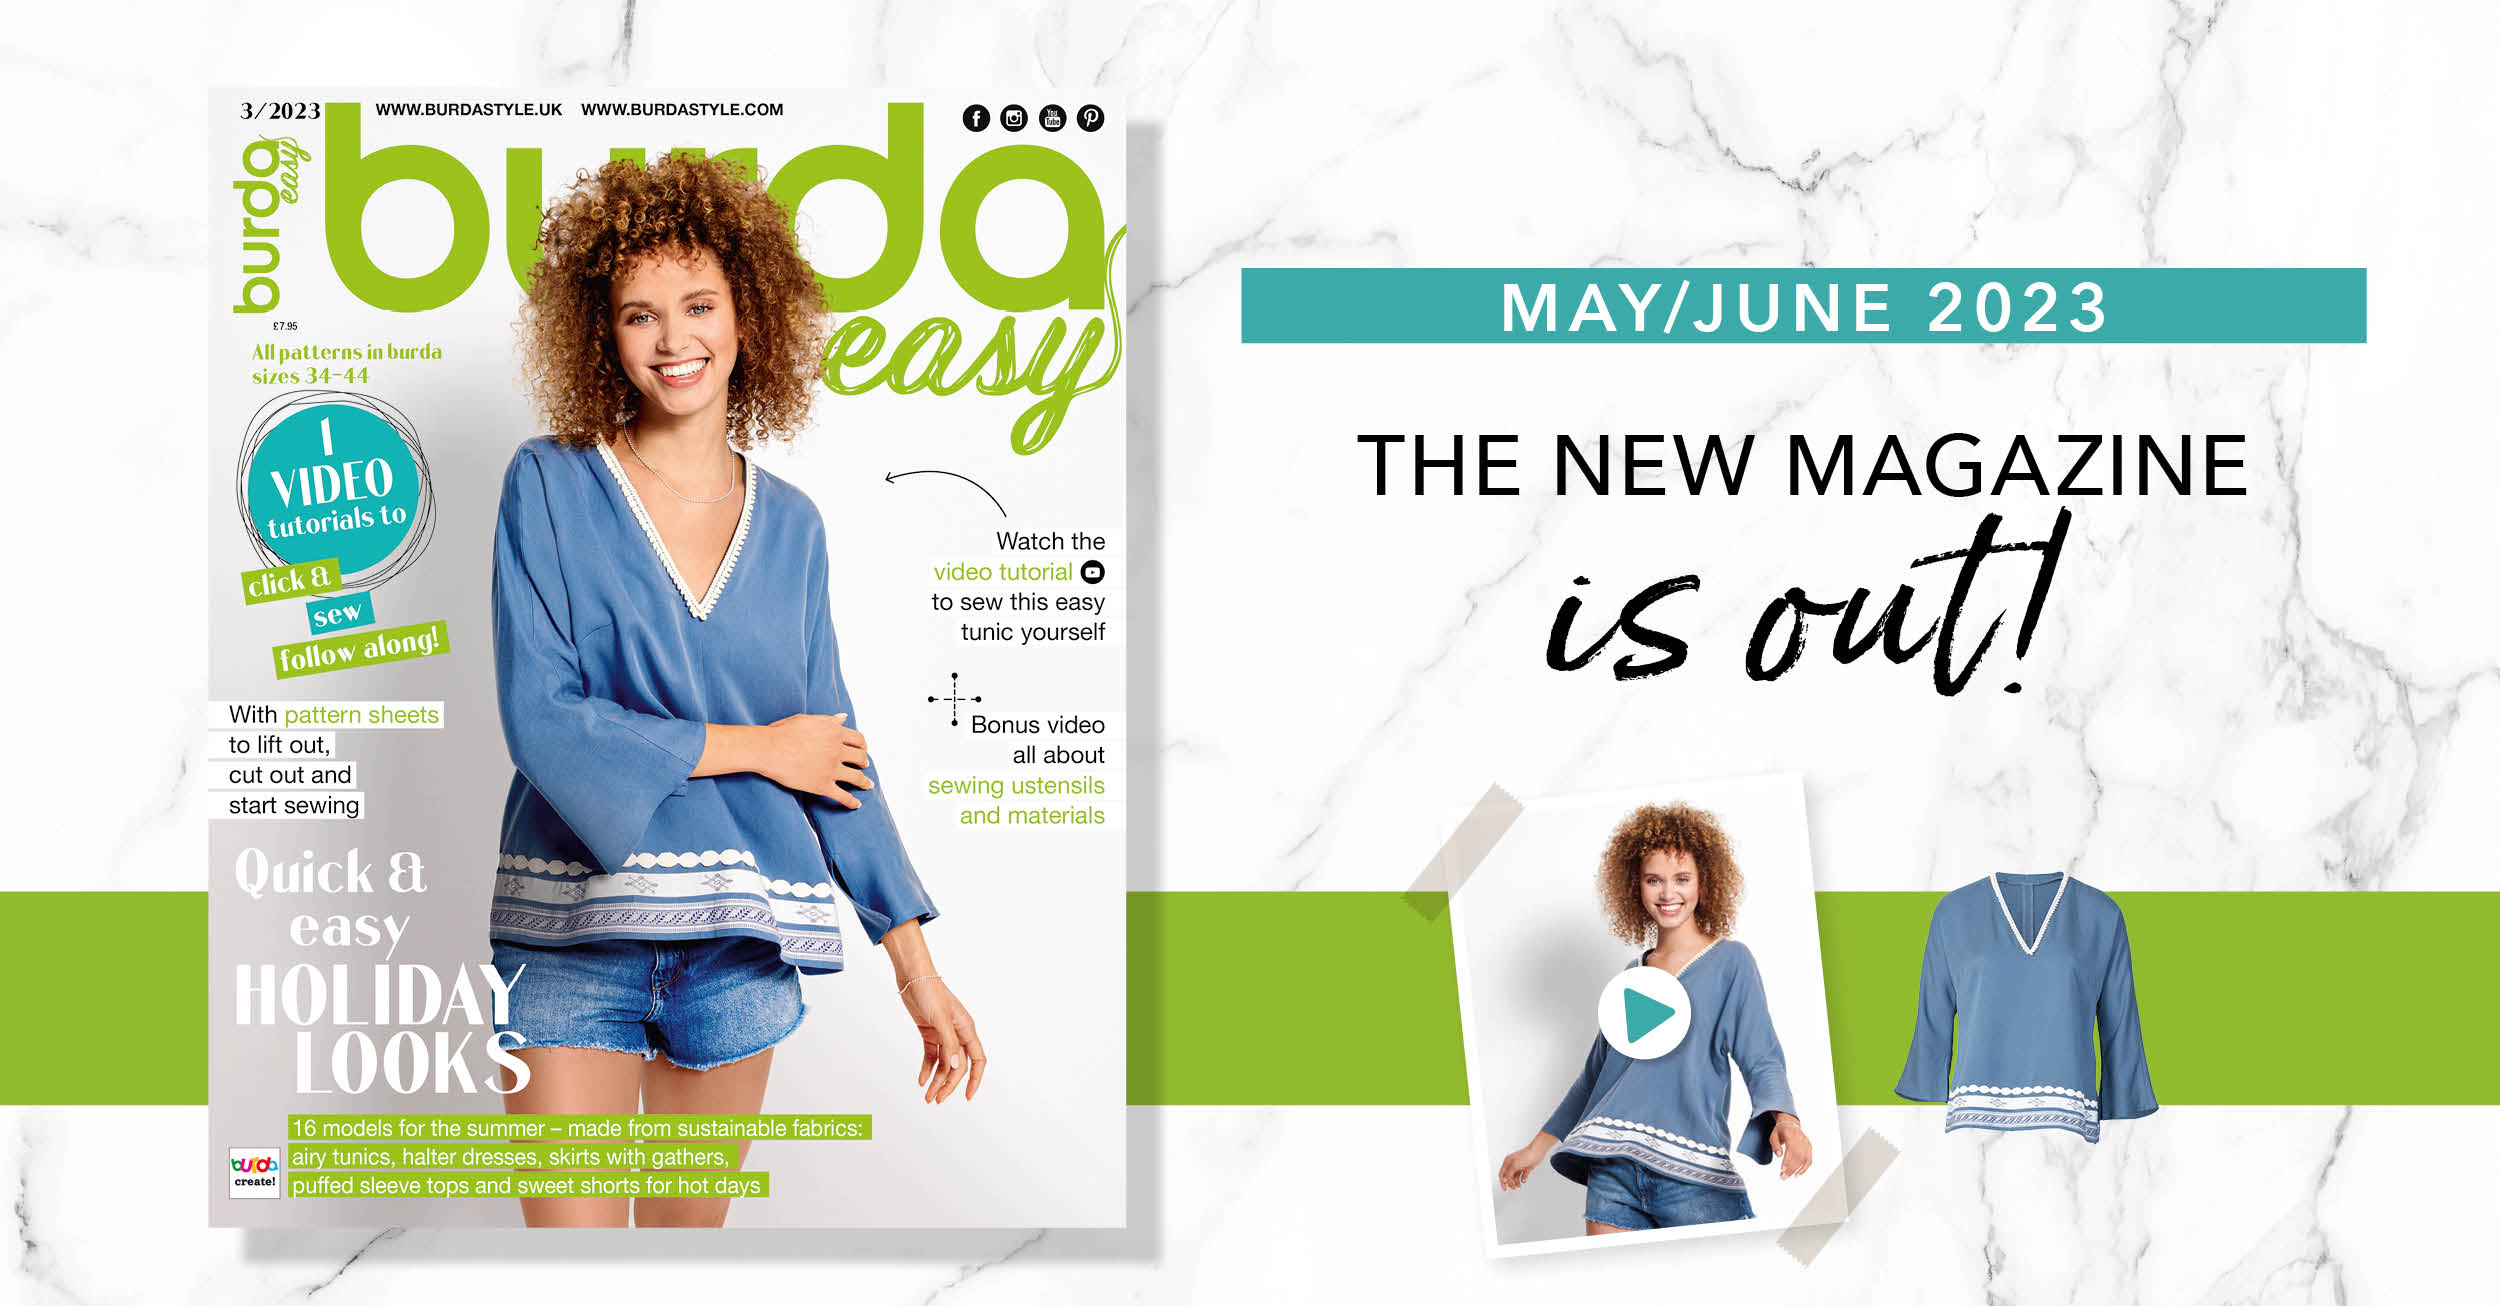 May/June 2023: The New Issue of Burda Easy!